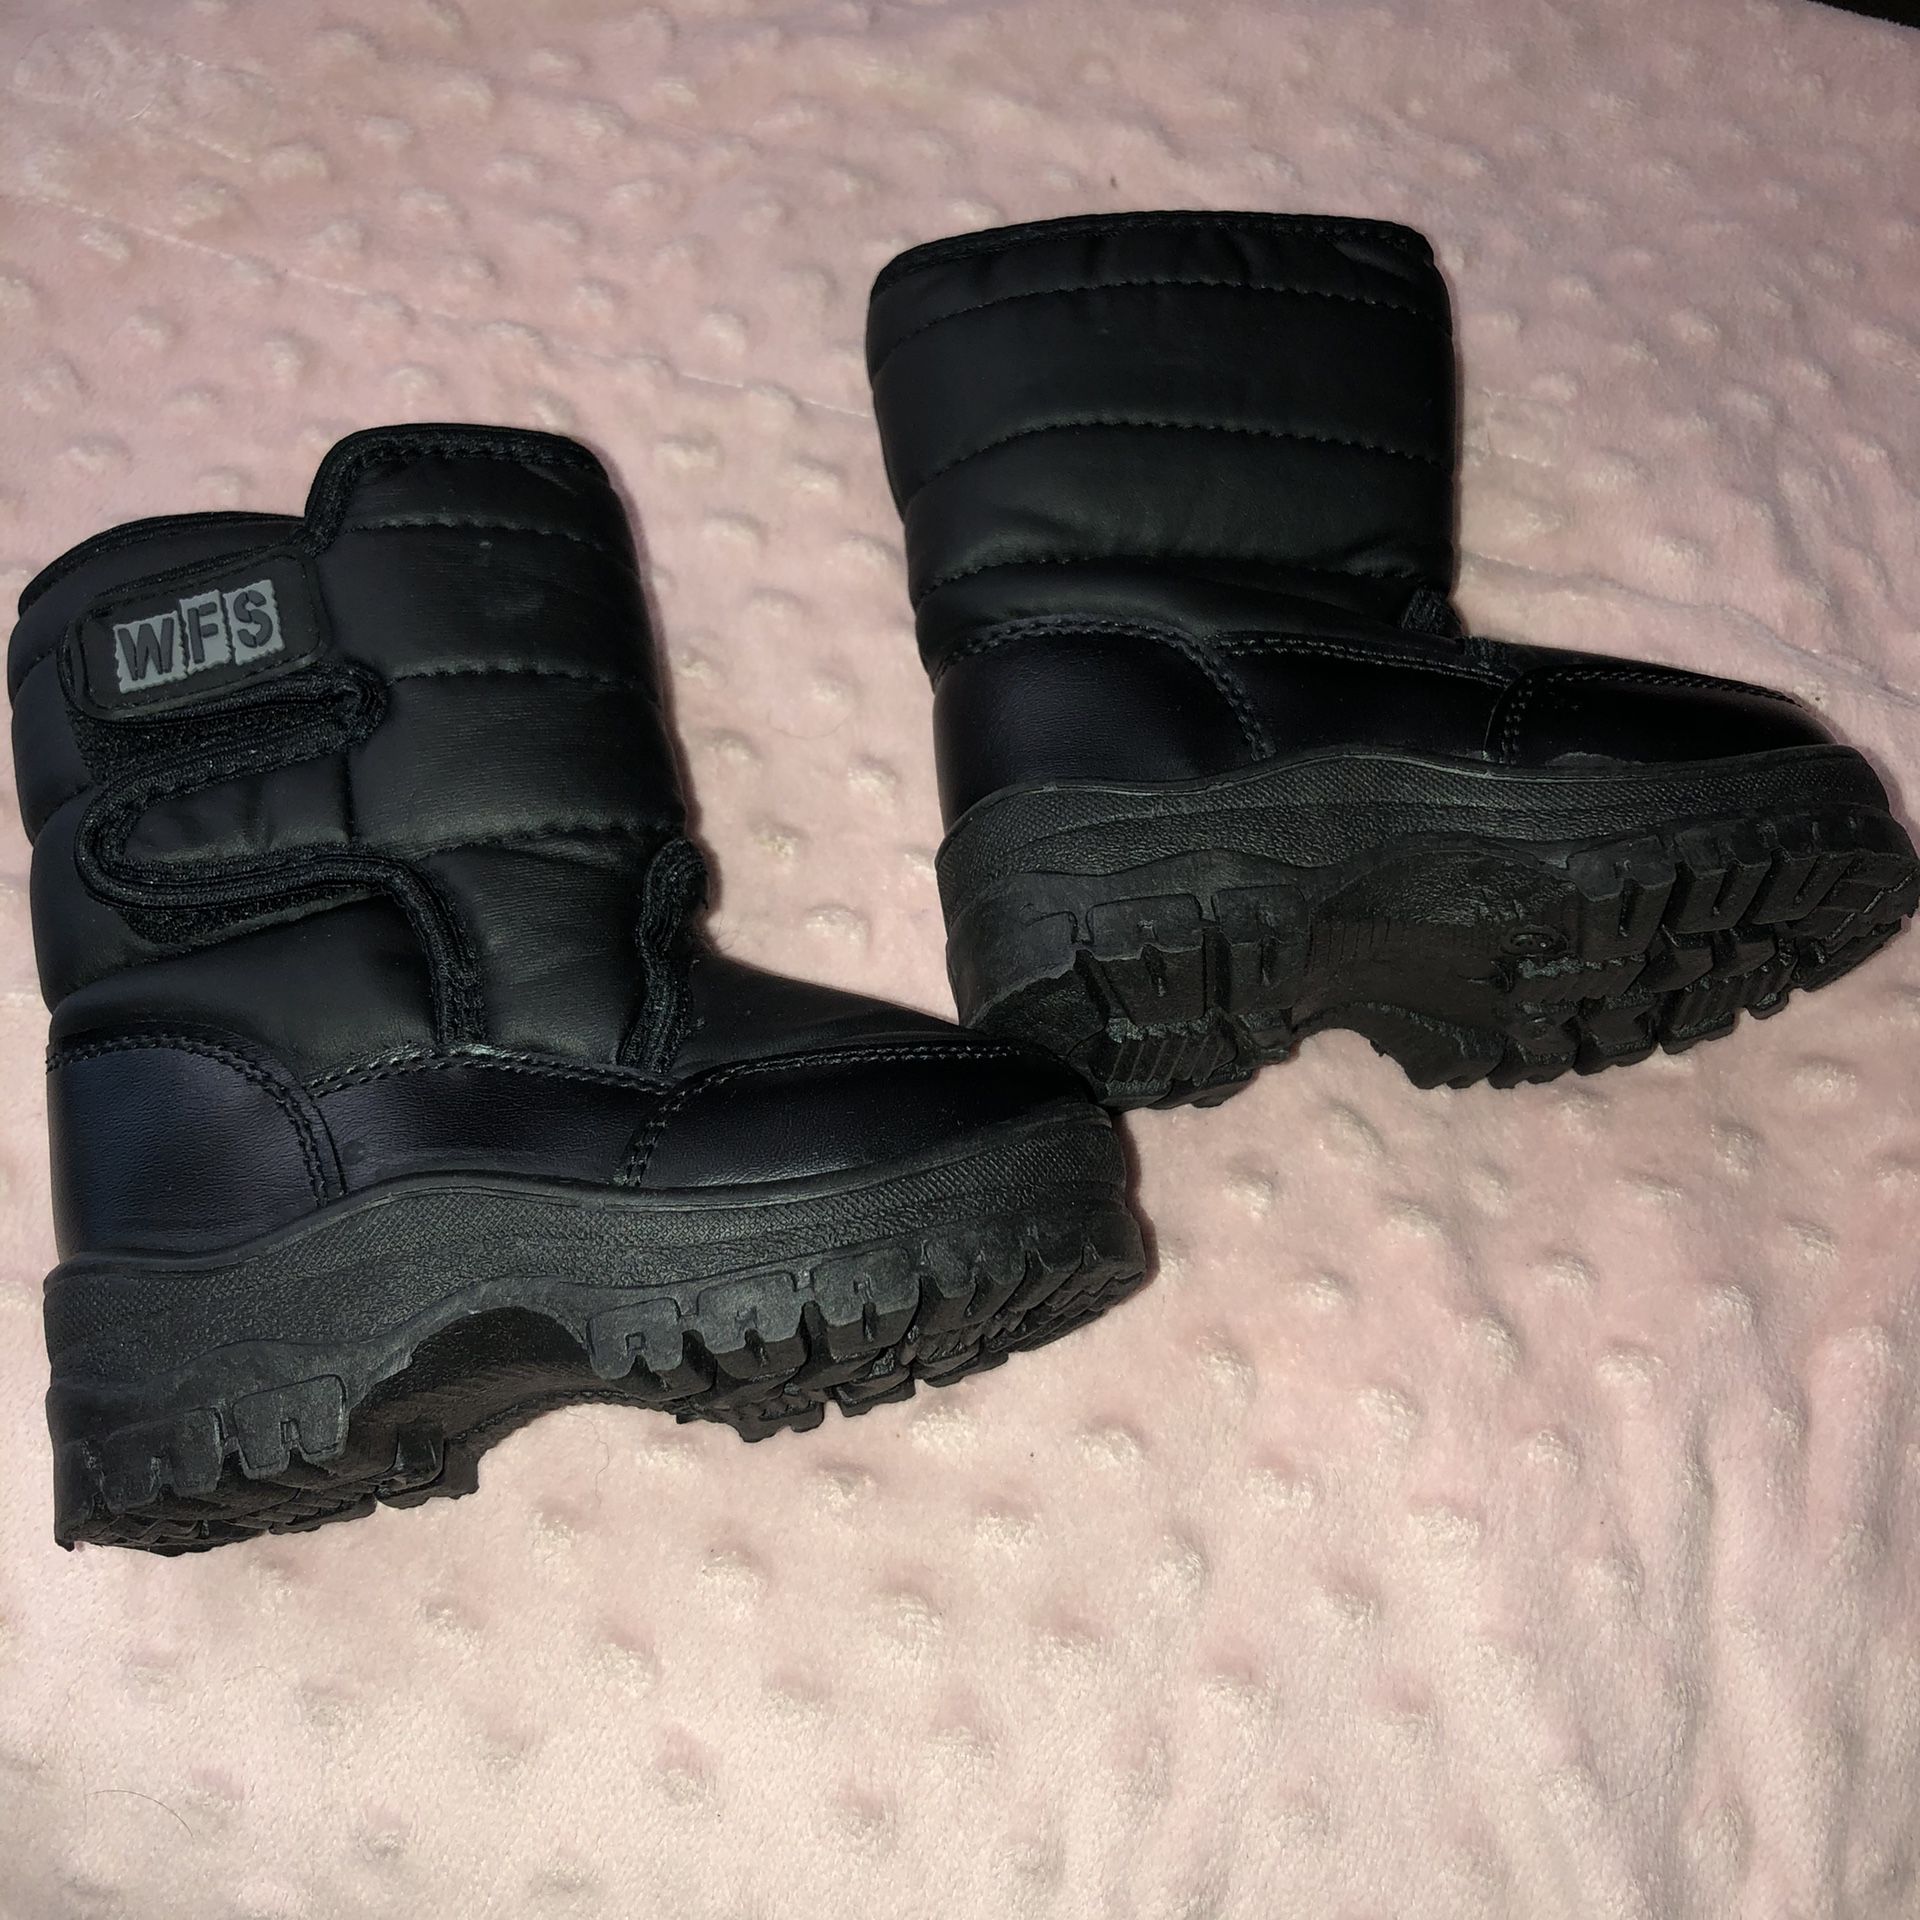 Toddler Size 6 Snow Boots